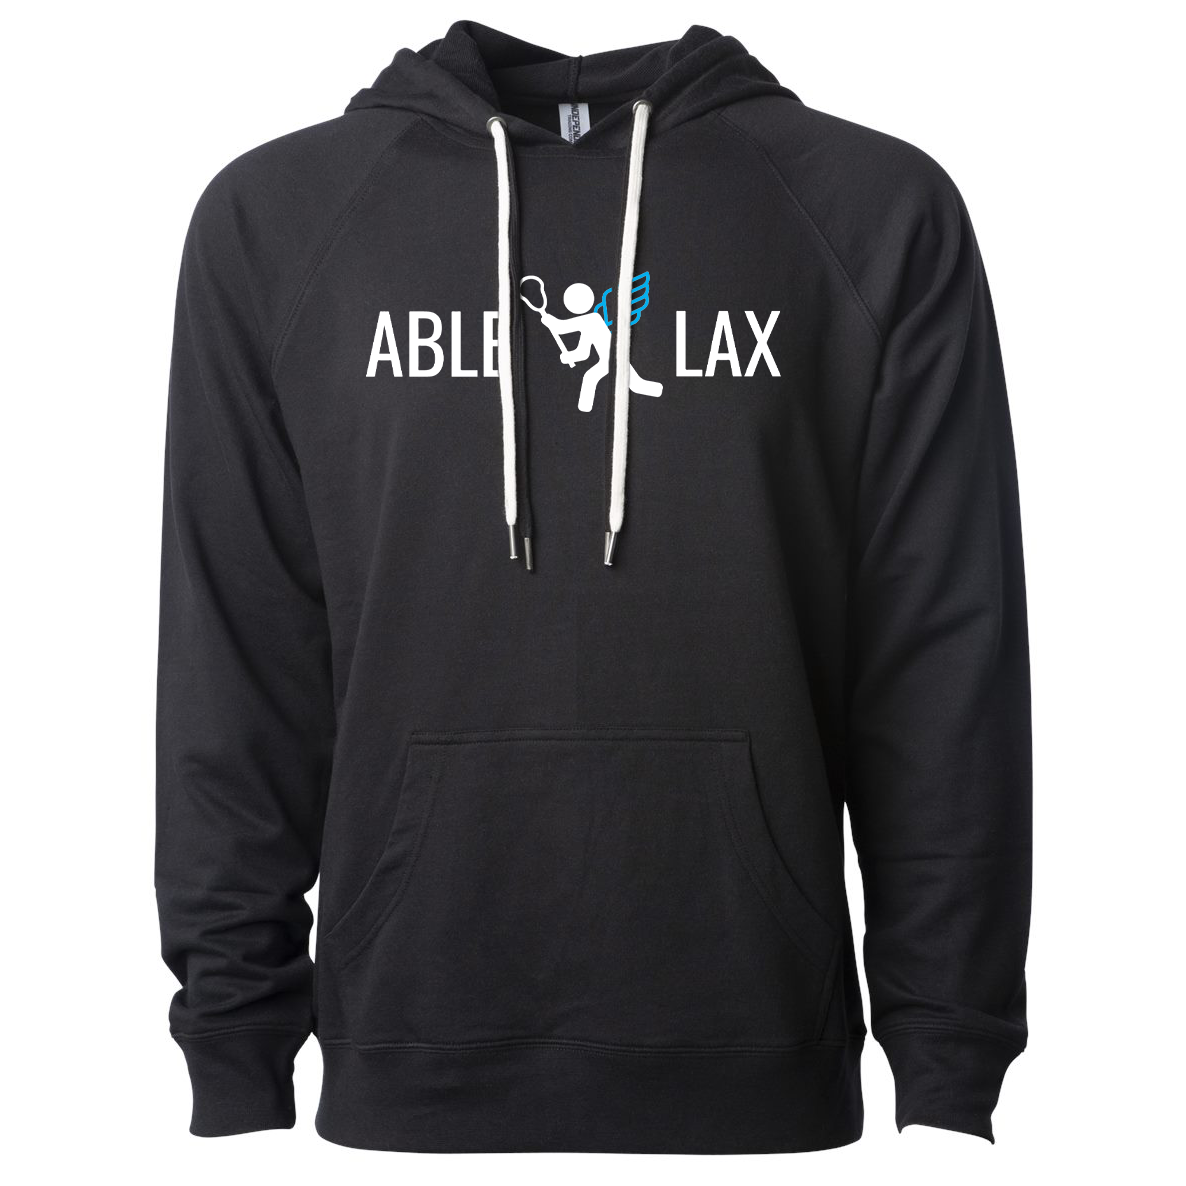 ABLE Lacrosse Independent Trading Co. Icon Lightweight Hoodie